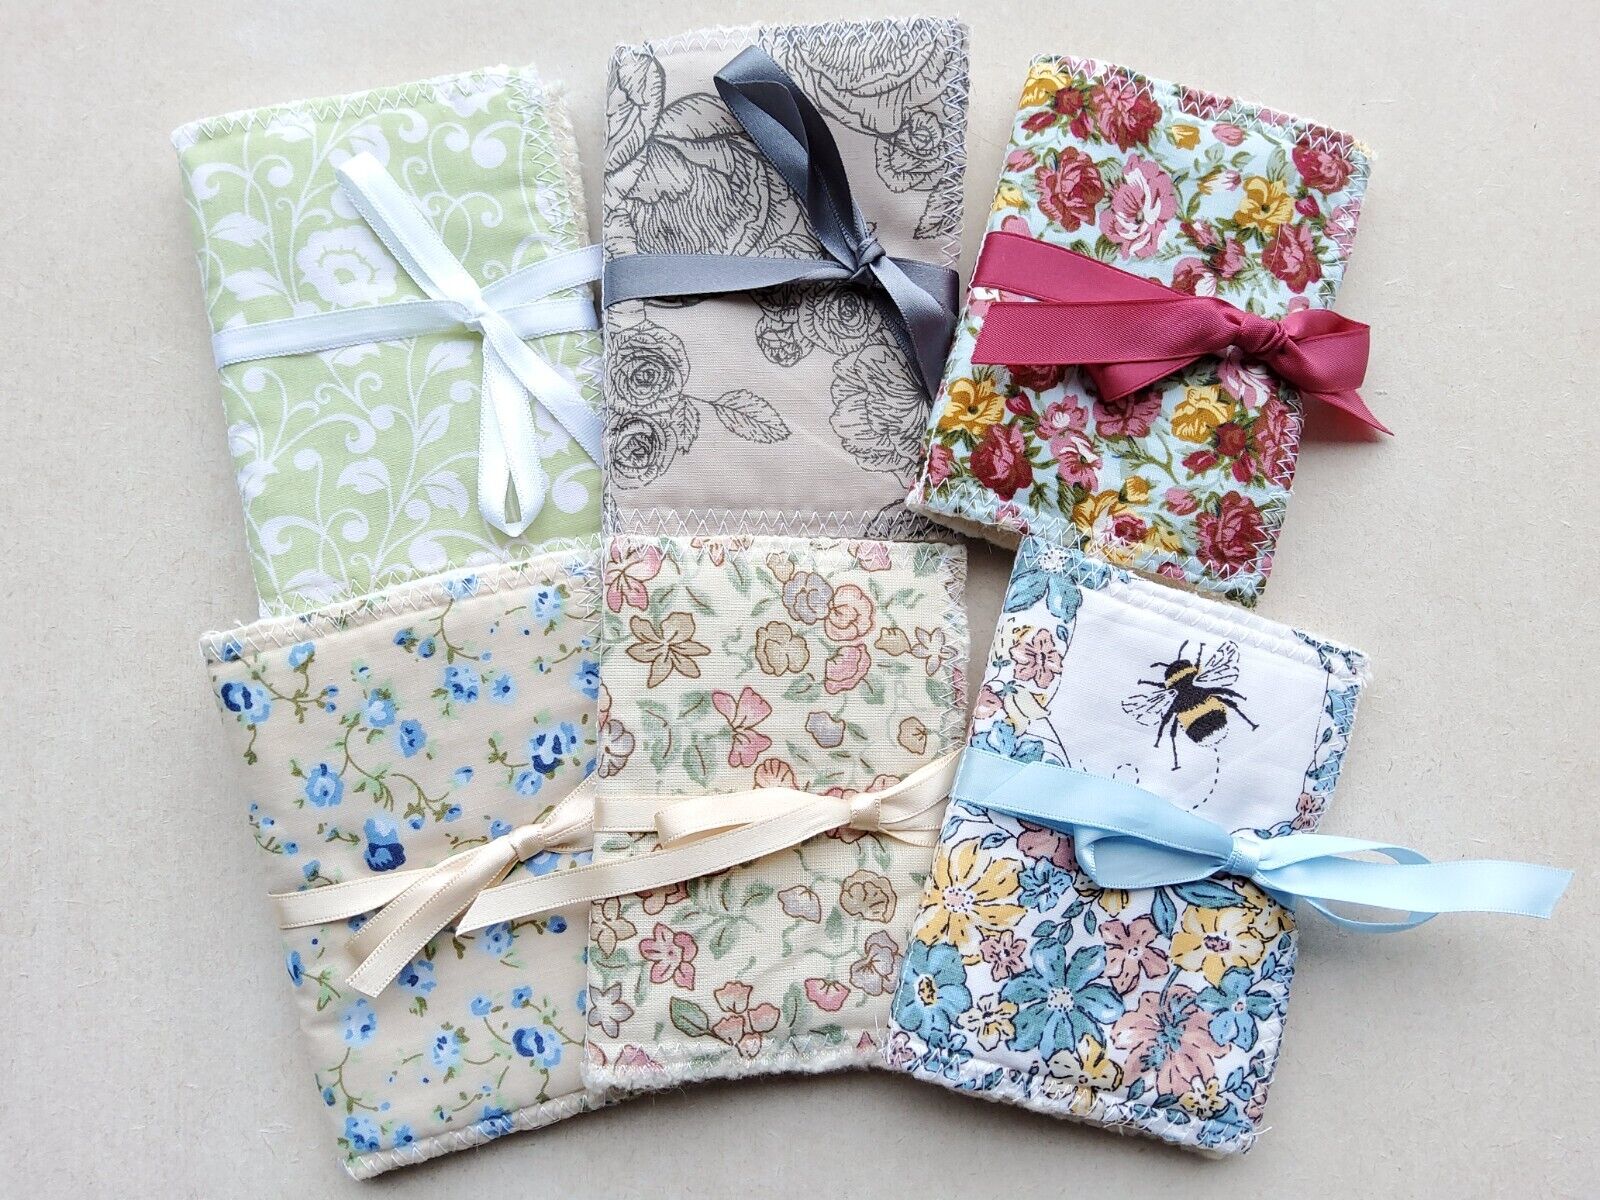 Handmade Needle Book, 6 Different Designs, Floral Cotton Fabric, Gift